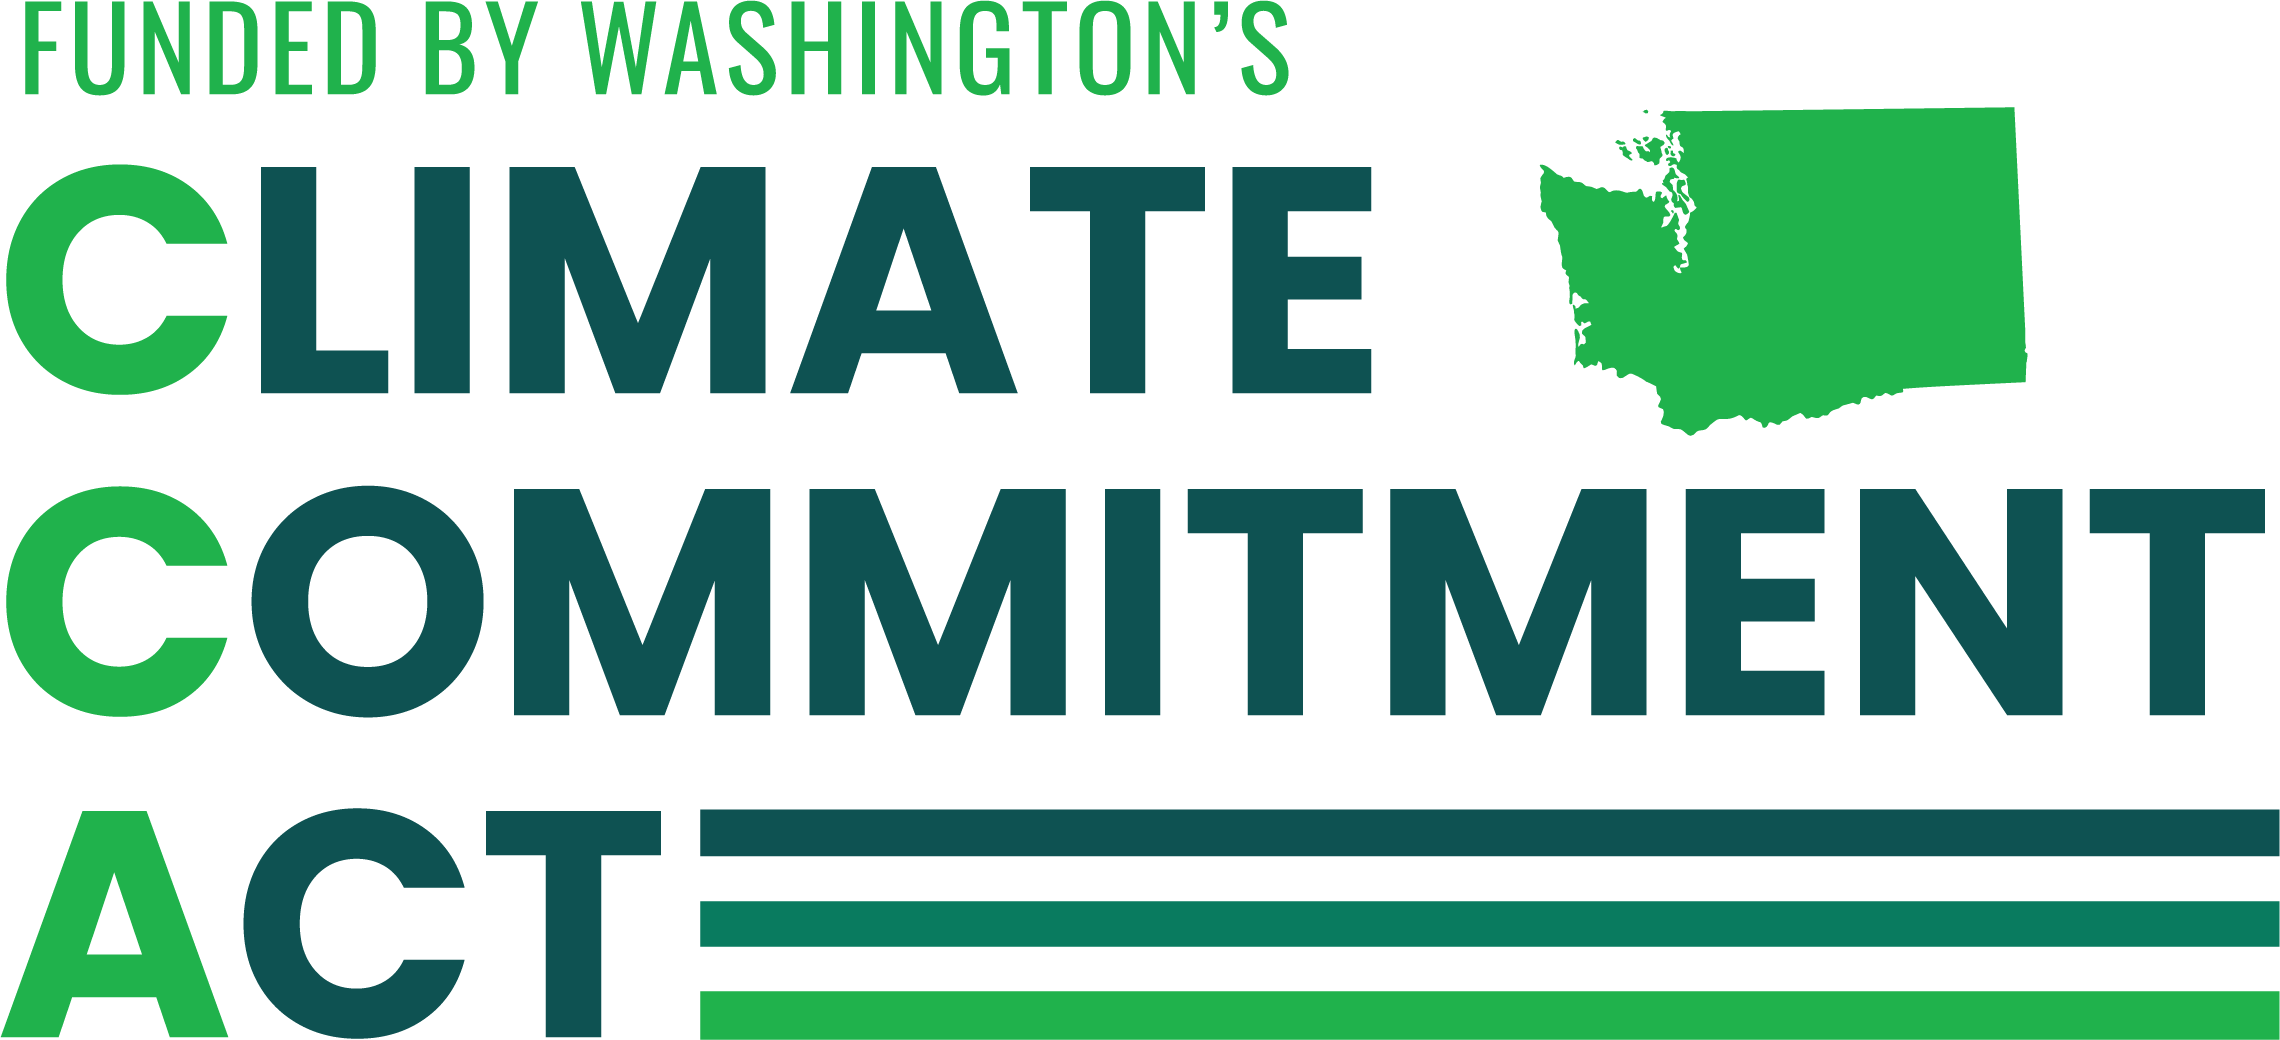 Funded by Washington's Climate Commitment Act